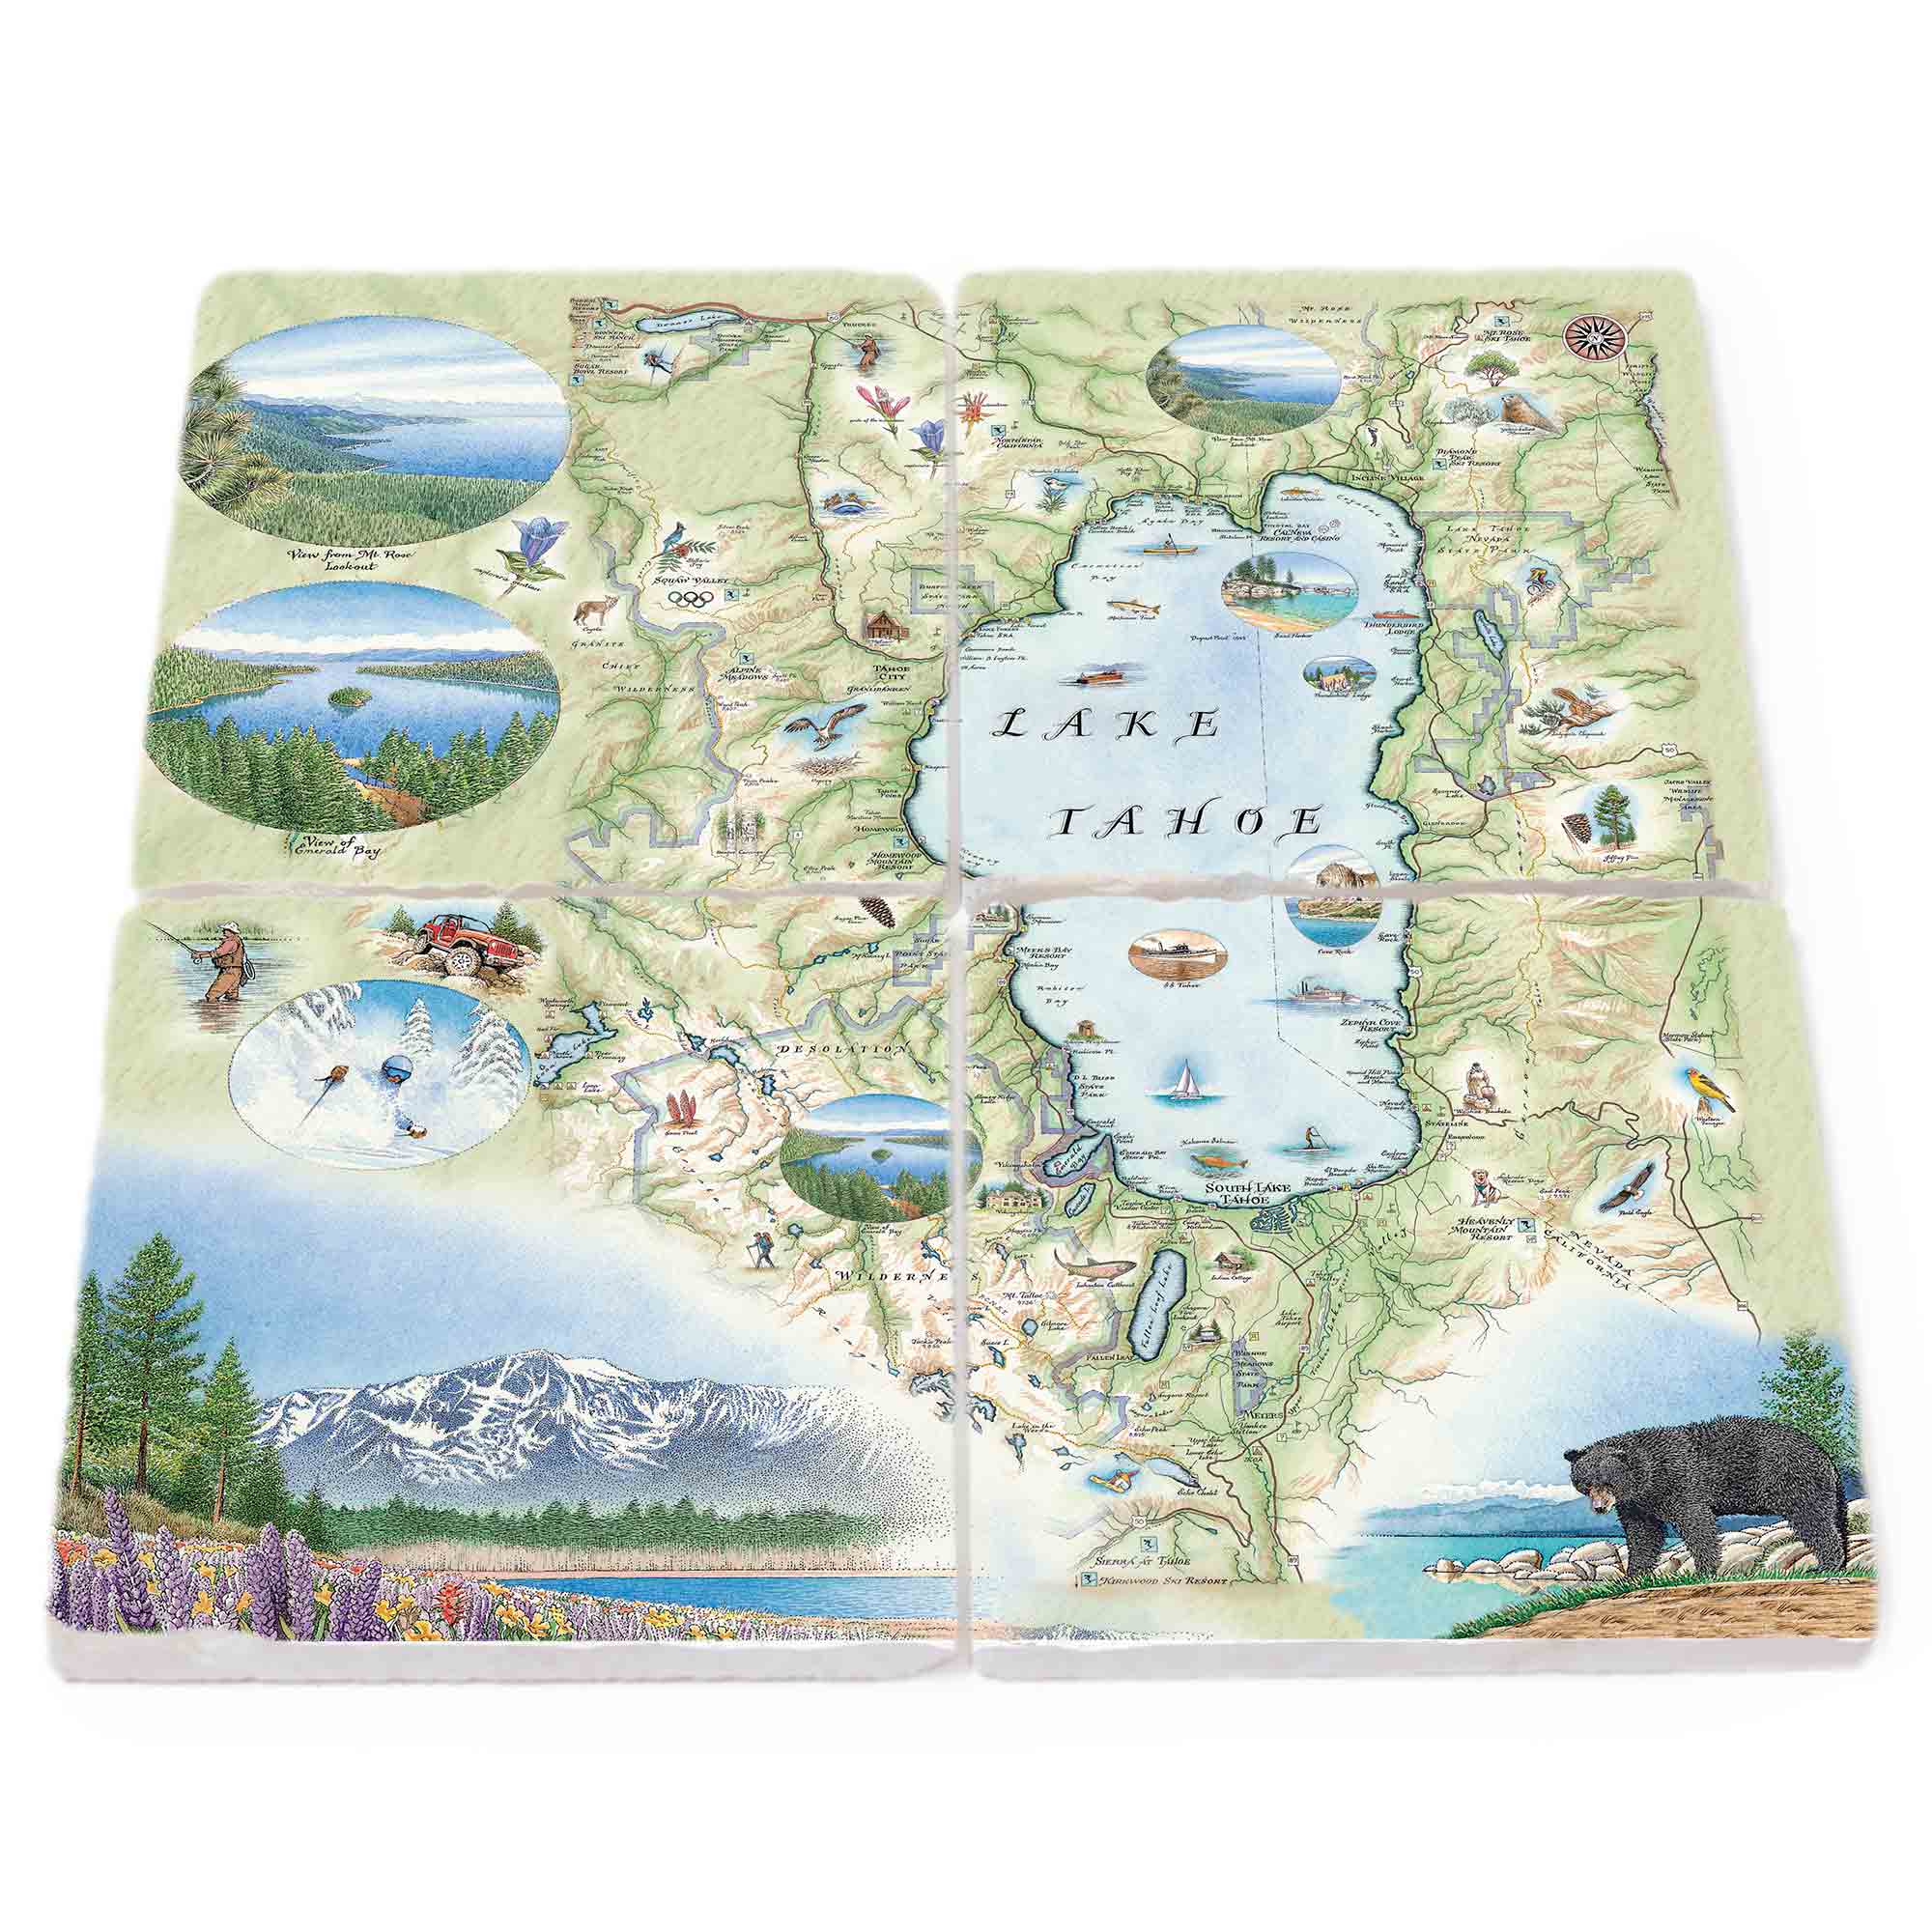 Lake Tahoe Map Stone Coaster Set of 4. Showcasing the beauty of the region with a black bear, majestic mountains, vibrant wildflowers, a scenic view of Emerald Bay, Squaw Valley, and activities like skiing and flyfishing. A stunning collection capturing the essence of Lake Tahoe.